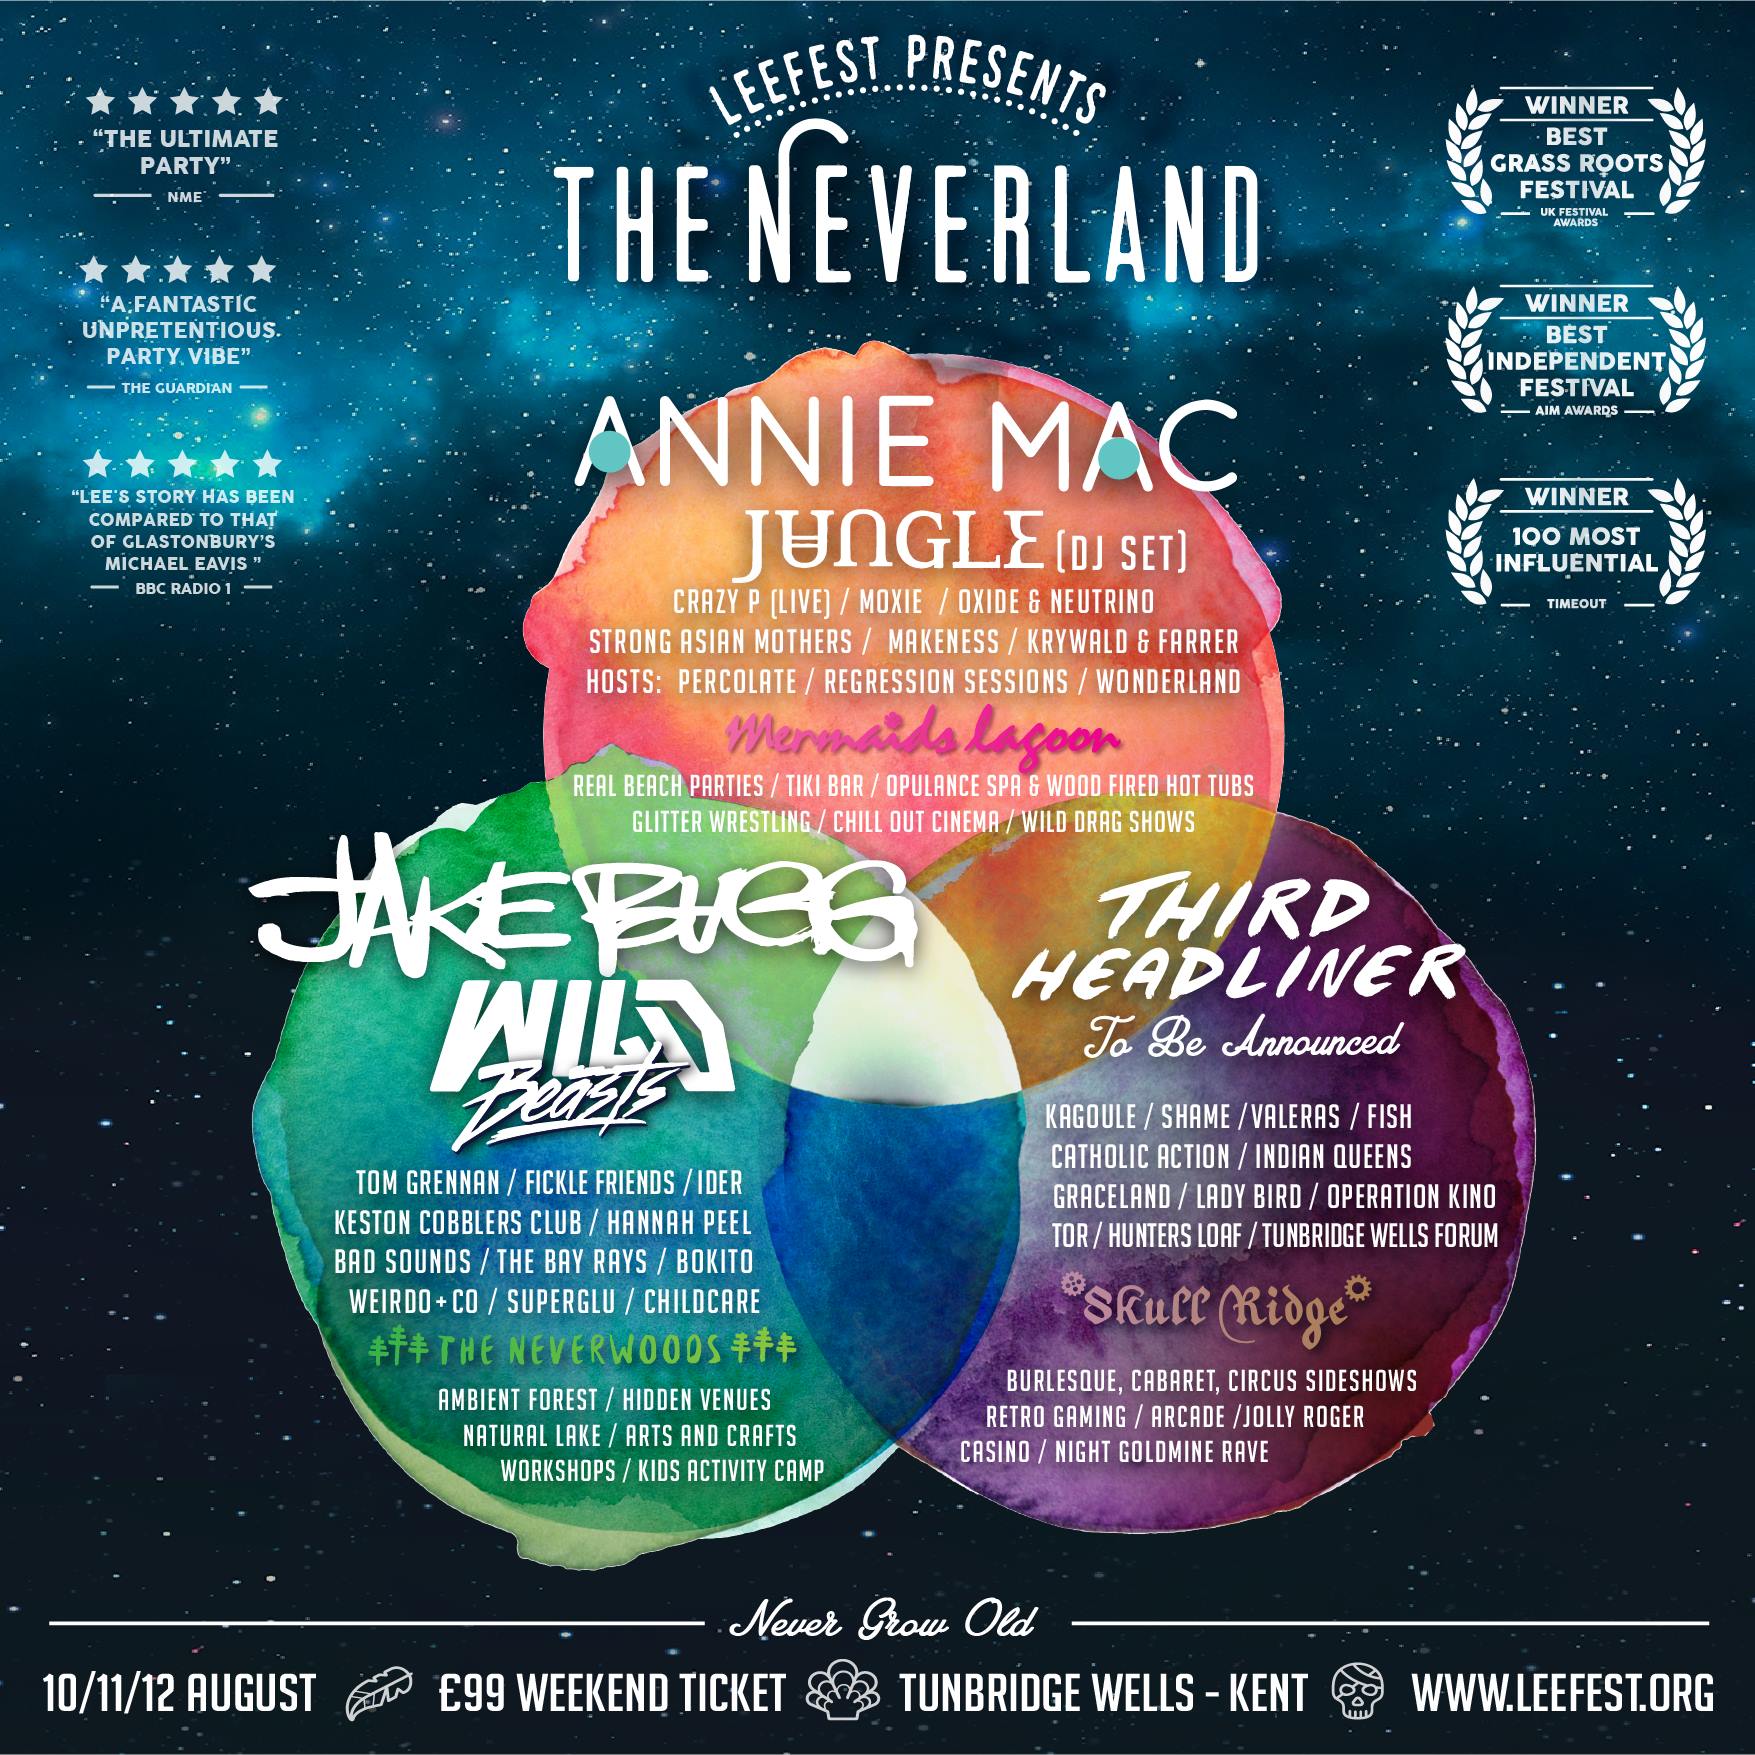 Leefest presents The Neverland 2017 announce Jake Bugg And Annie Mac